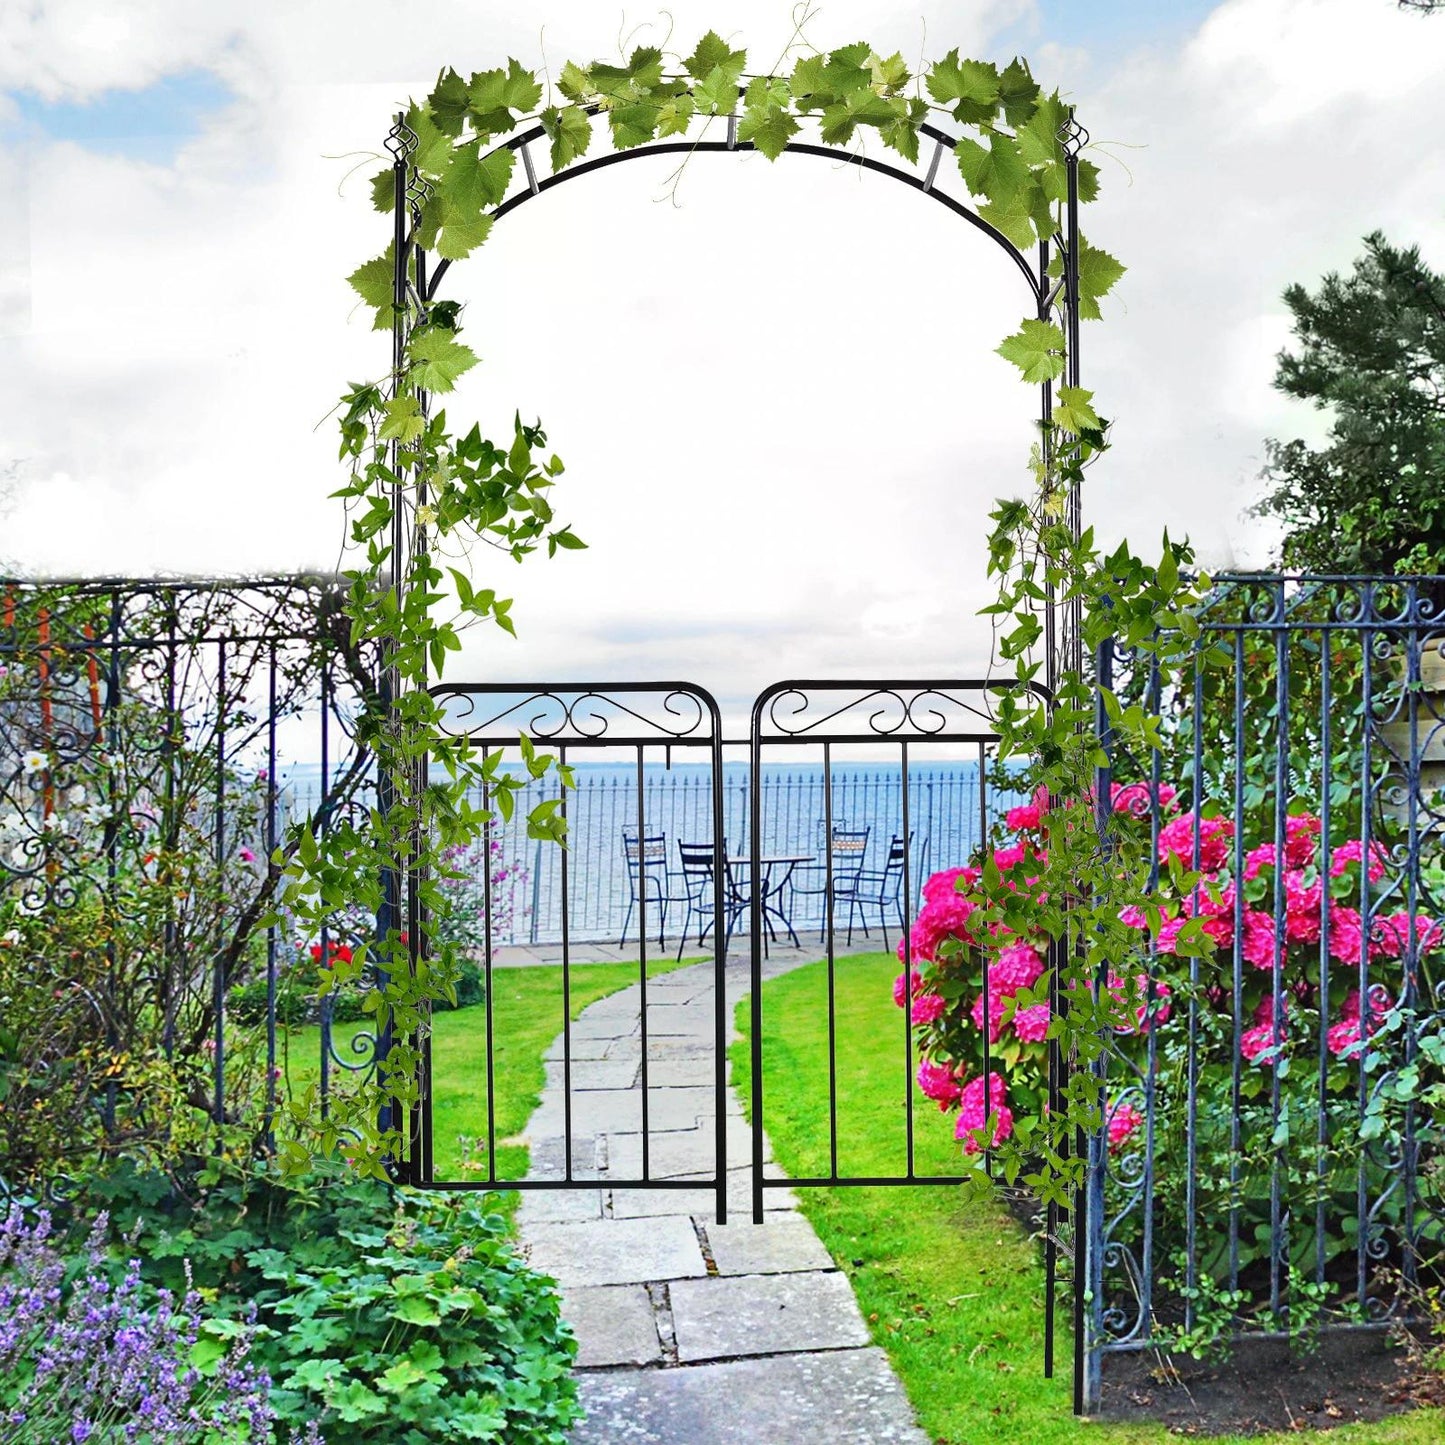 Outsunny Garden Decorative Metal Arch with Gate Outdoor Patio Trellis Arbor for Climbing Plant Archway Antique Black - 108L x 45W x 215Hcm